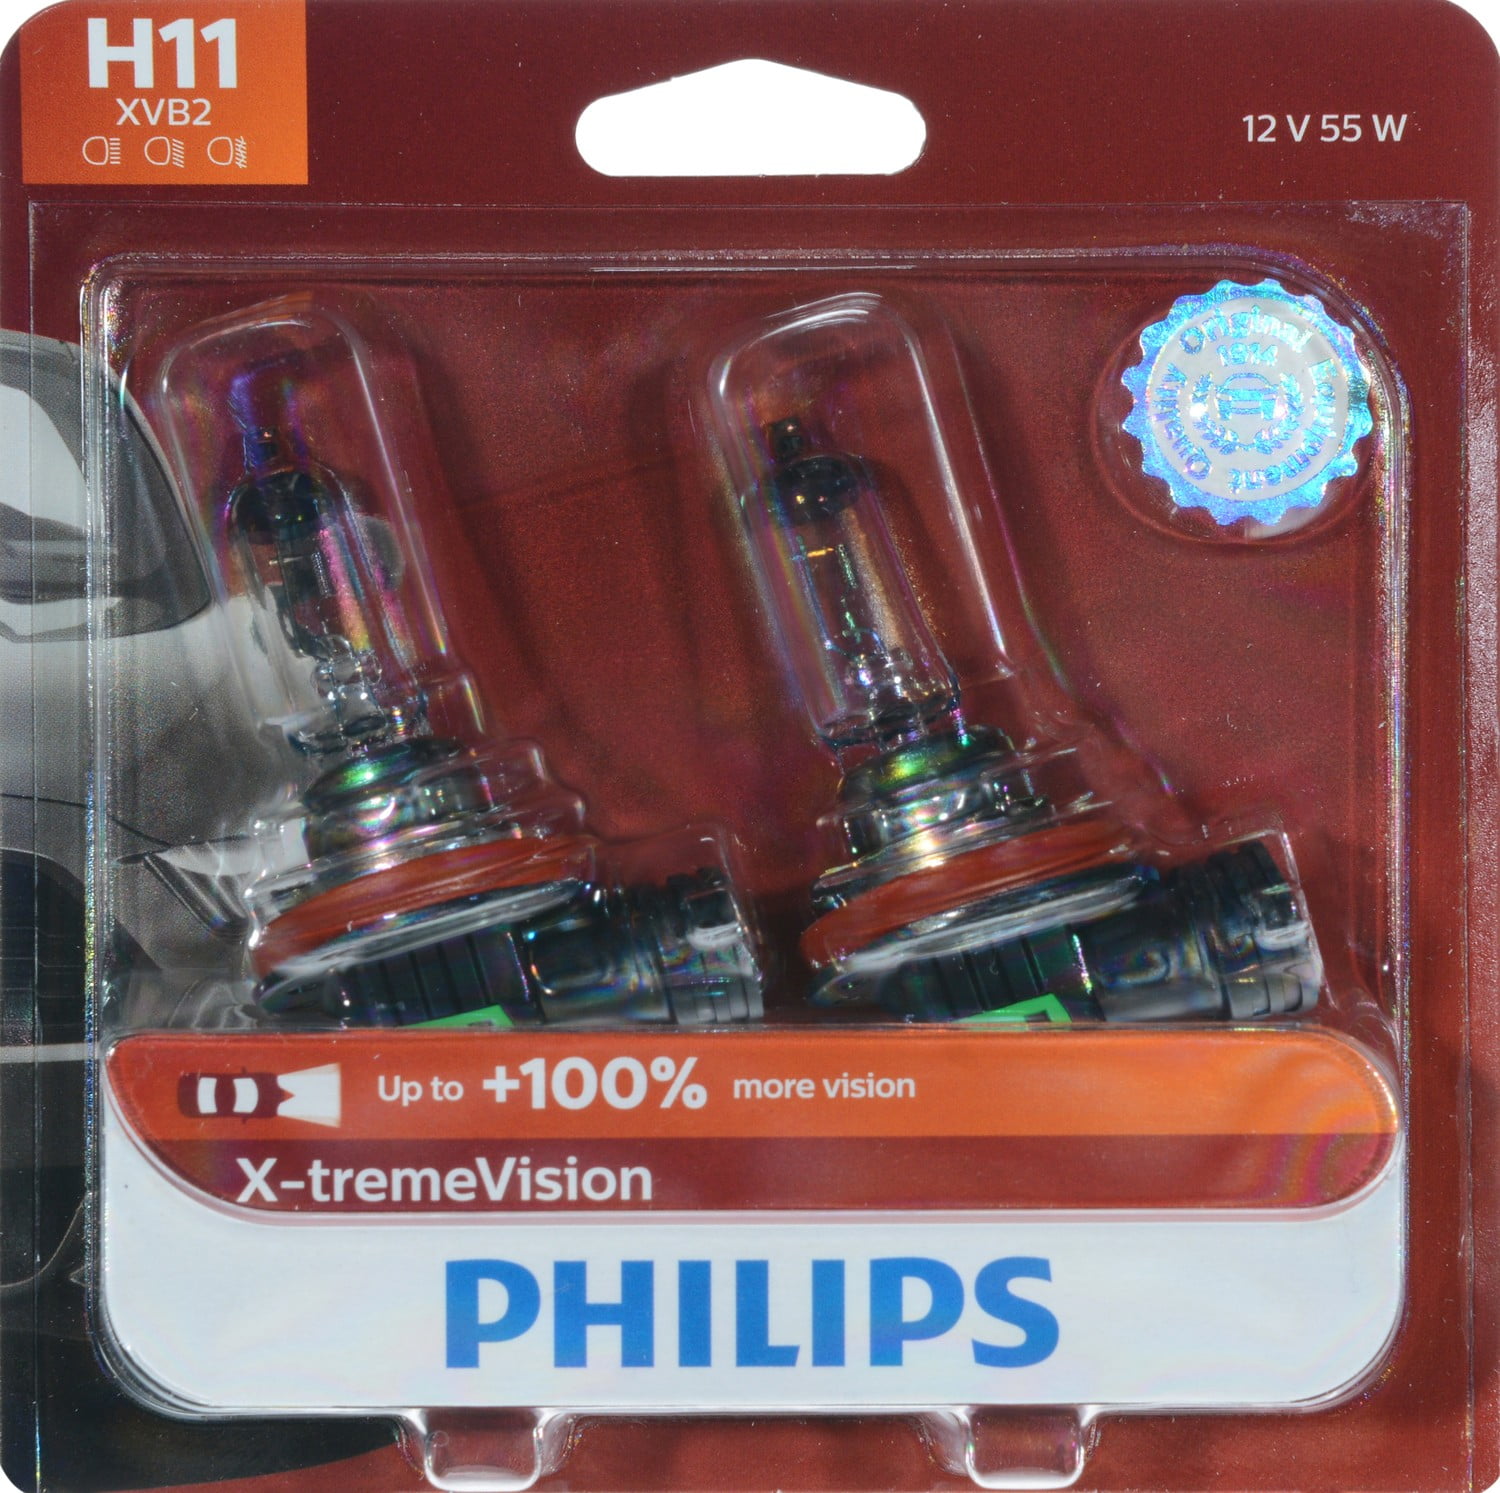 Philips H11 X-Tremevision Headlight H11, Pack of 2 